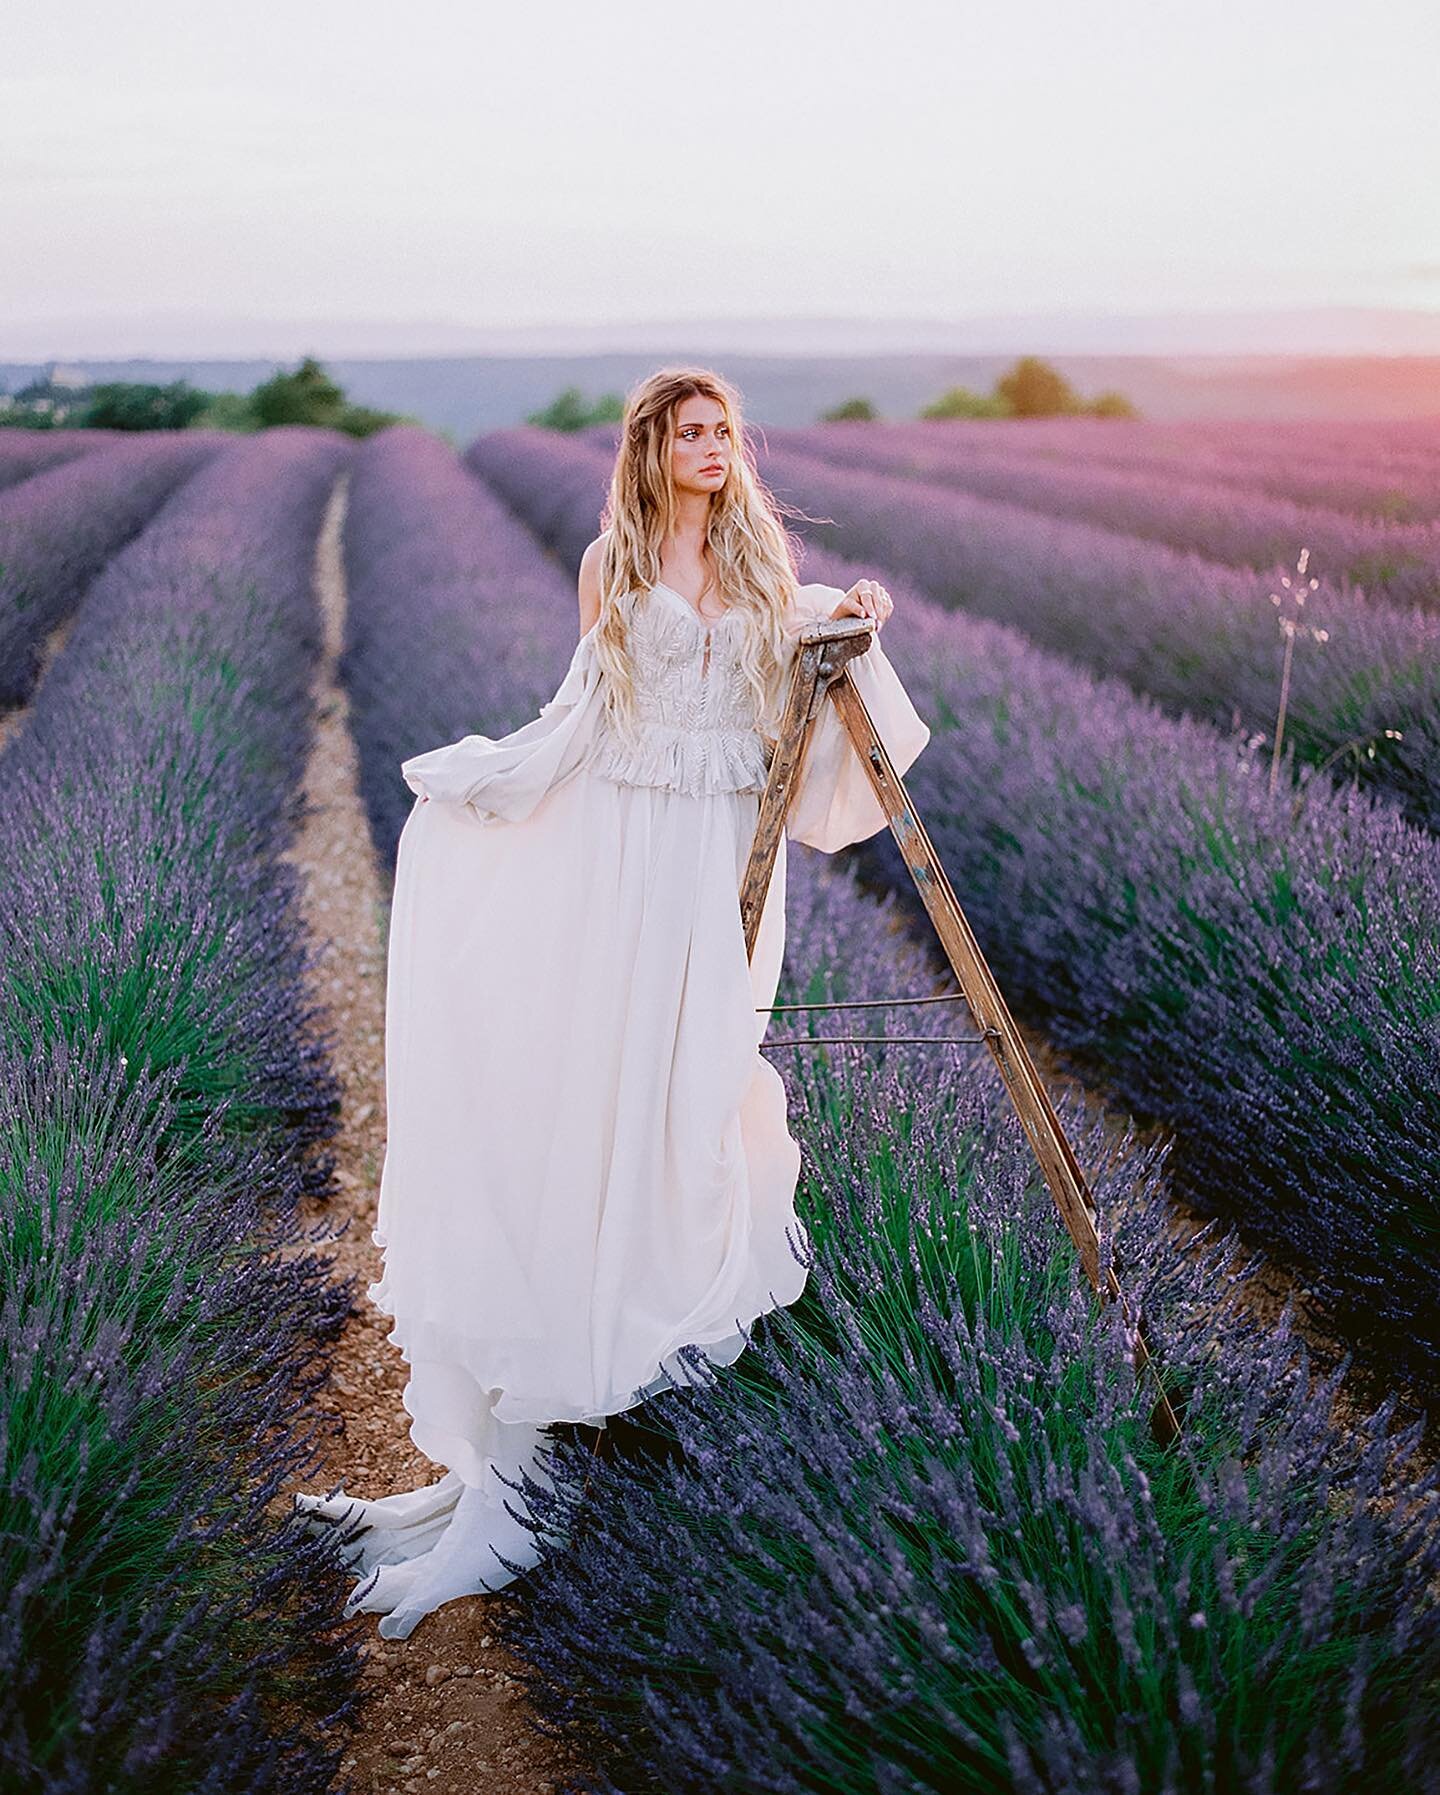 Experience and capture the essence of Provence, France through lavender. 

Join our photo session during the peak of lavender season in Provence for a unique and memorable experience.

Date: 7/1-2 
Where: Provence,France
1 hour session
Includes: Hair